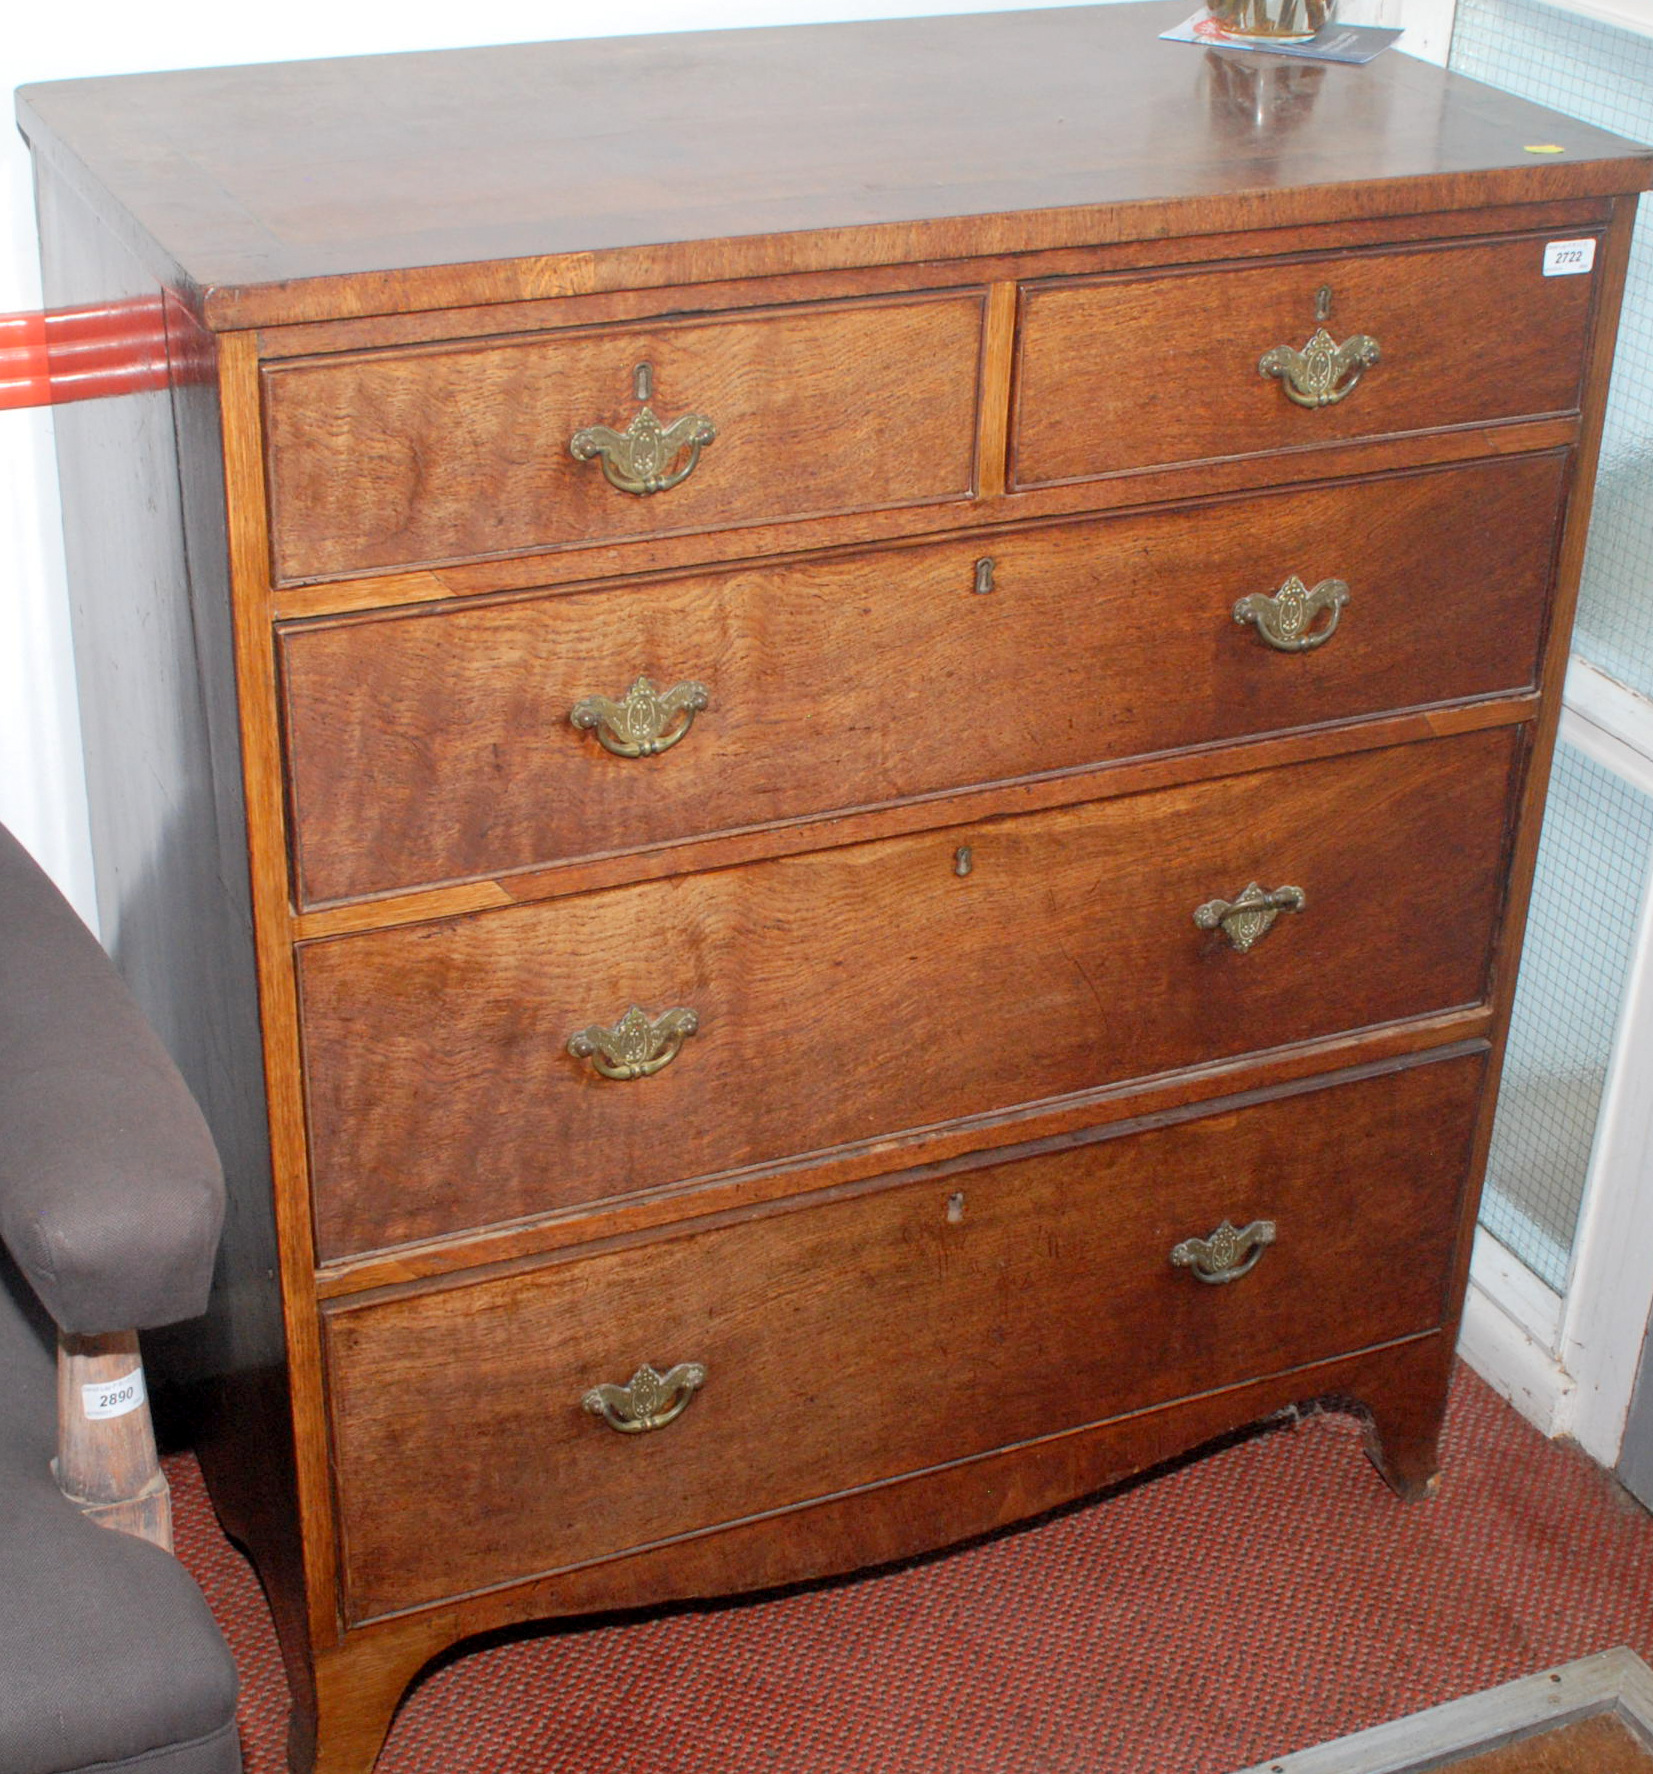 A late Georgian cross-banded oak chest of drawers.